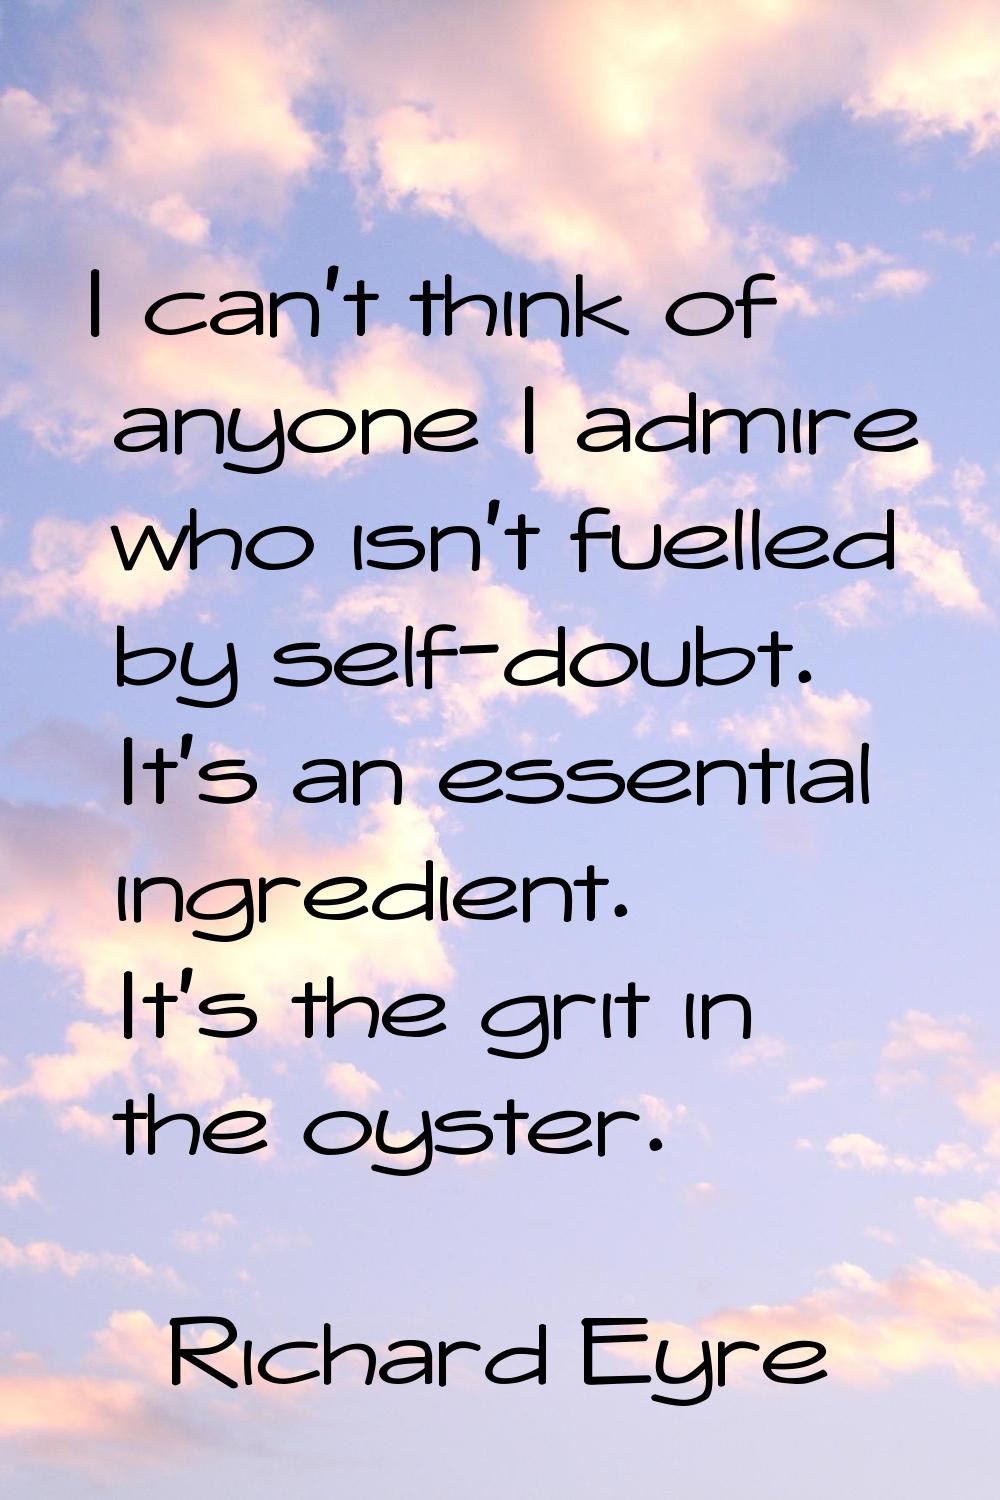 I can't think of anyone I admire who isn't fuelled by self-doubt. It's an essential ingredient. It'